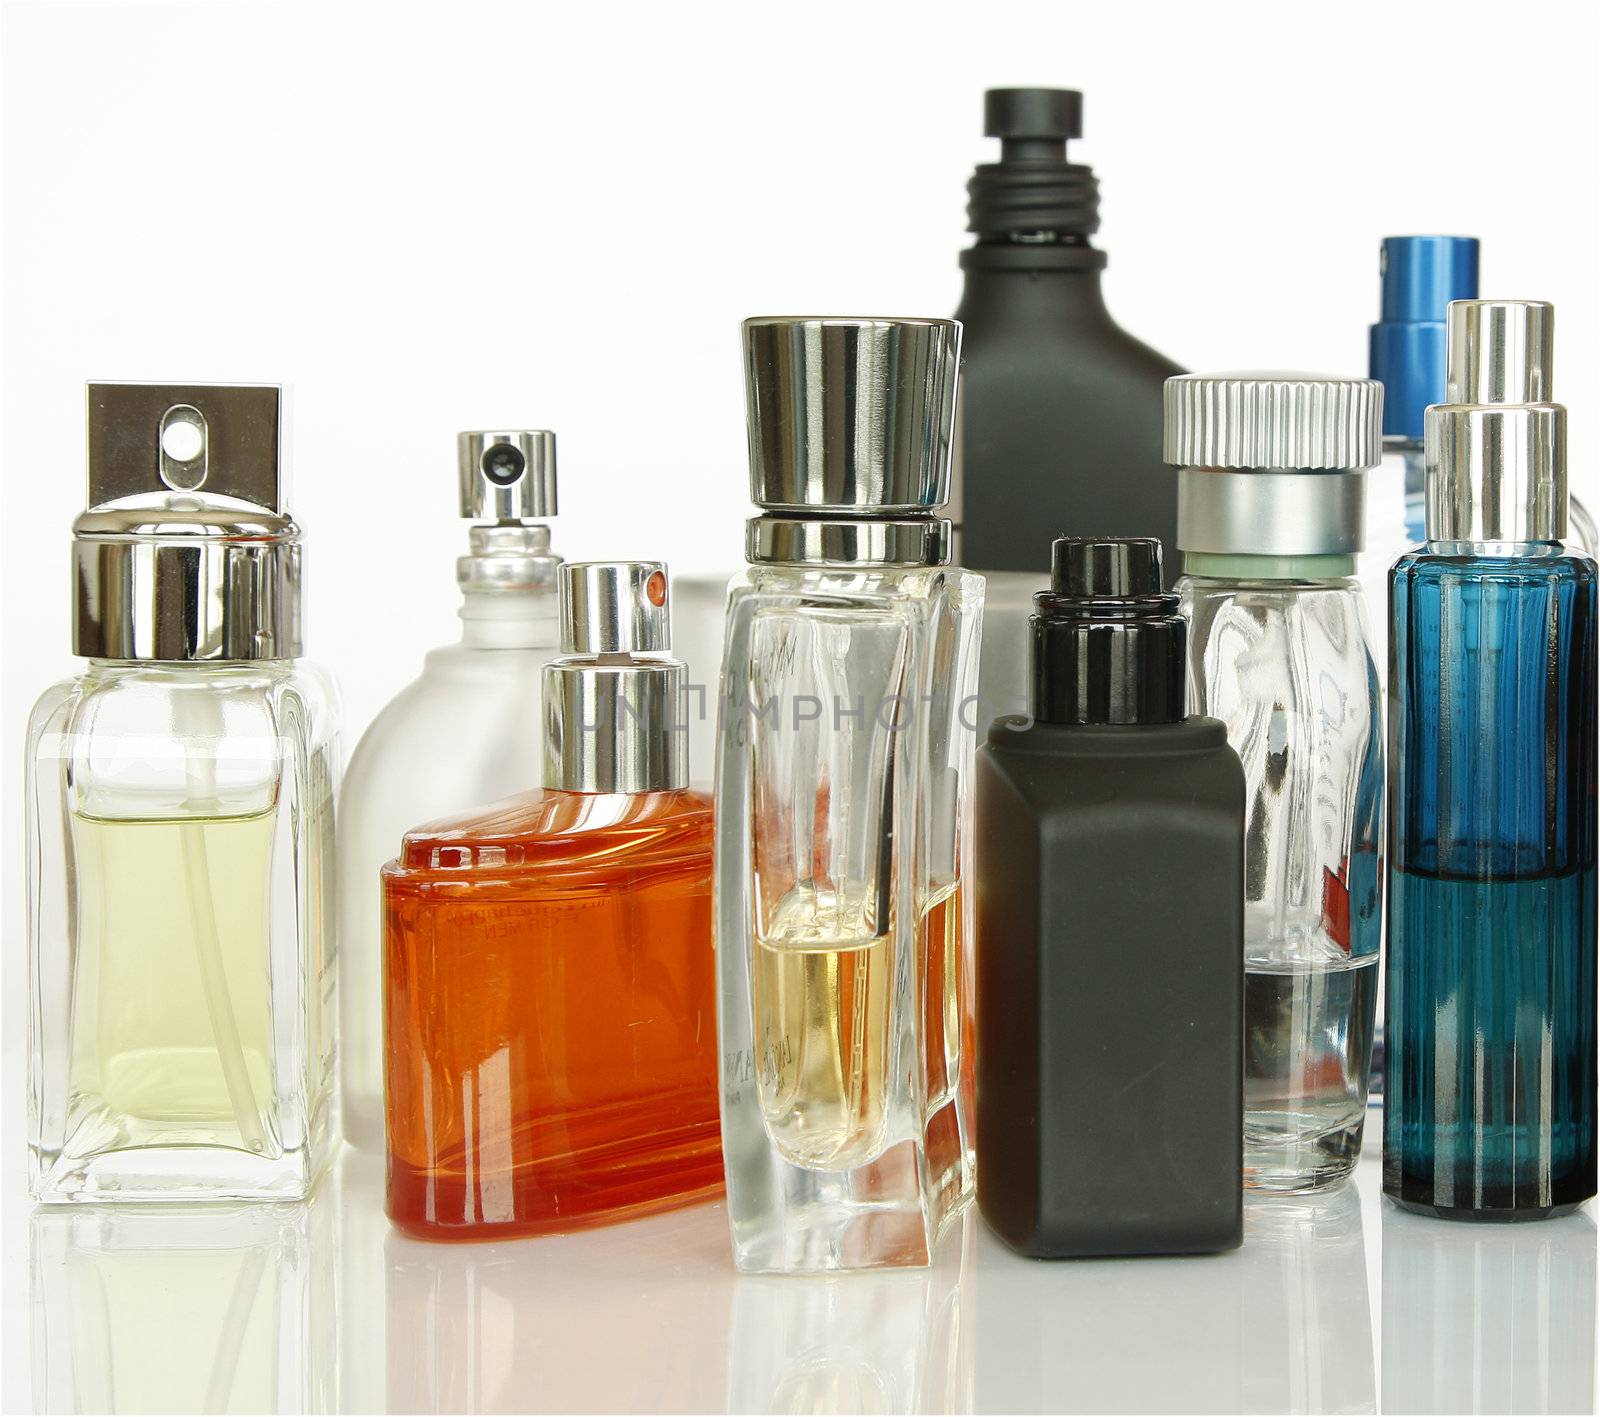 Perfume and Fragrances bottles isolated in white background.